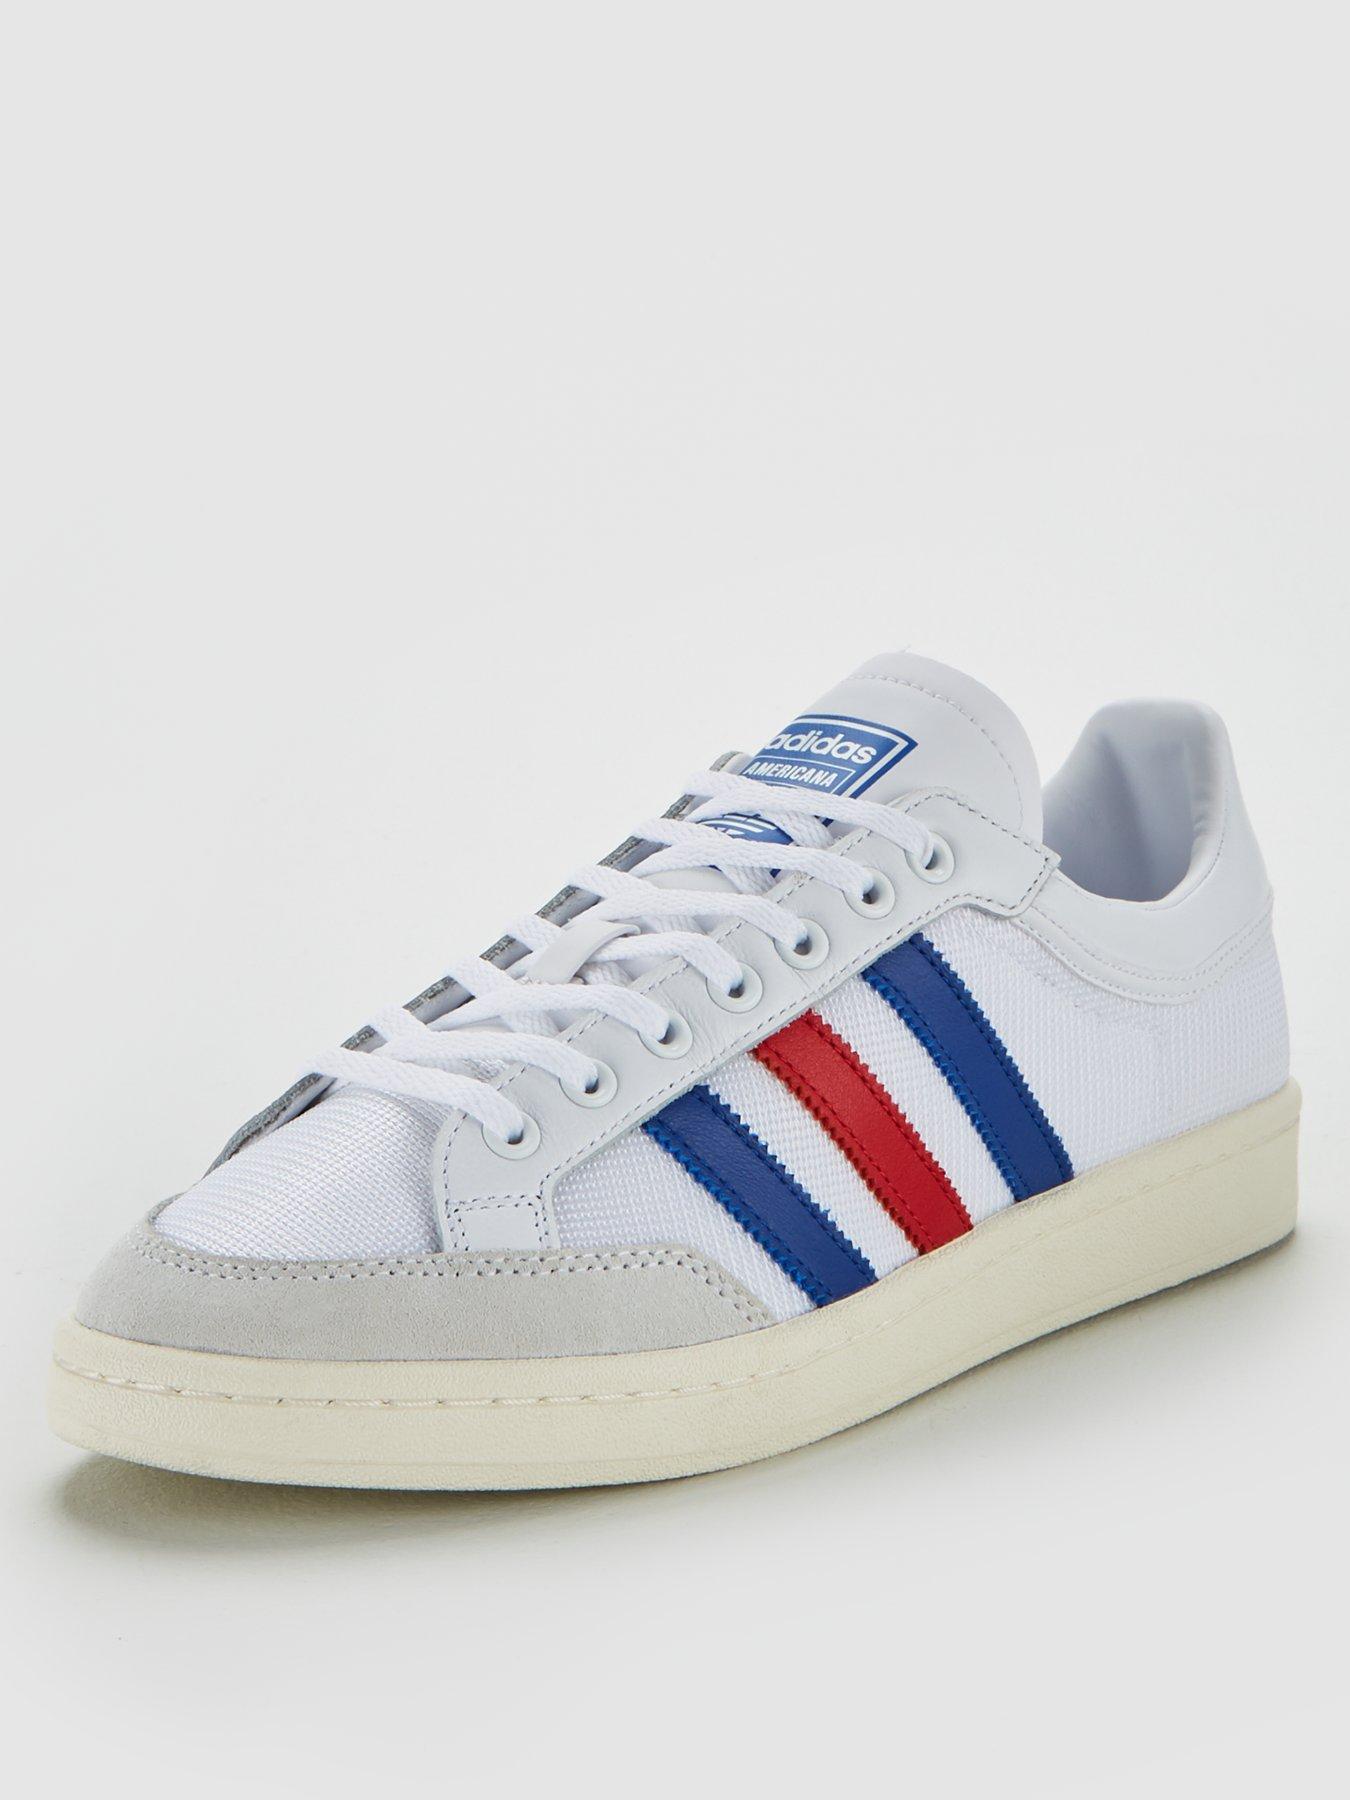 adidas trainers red white blue